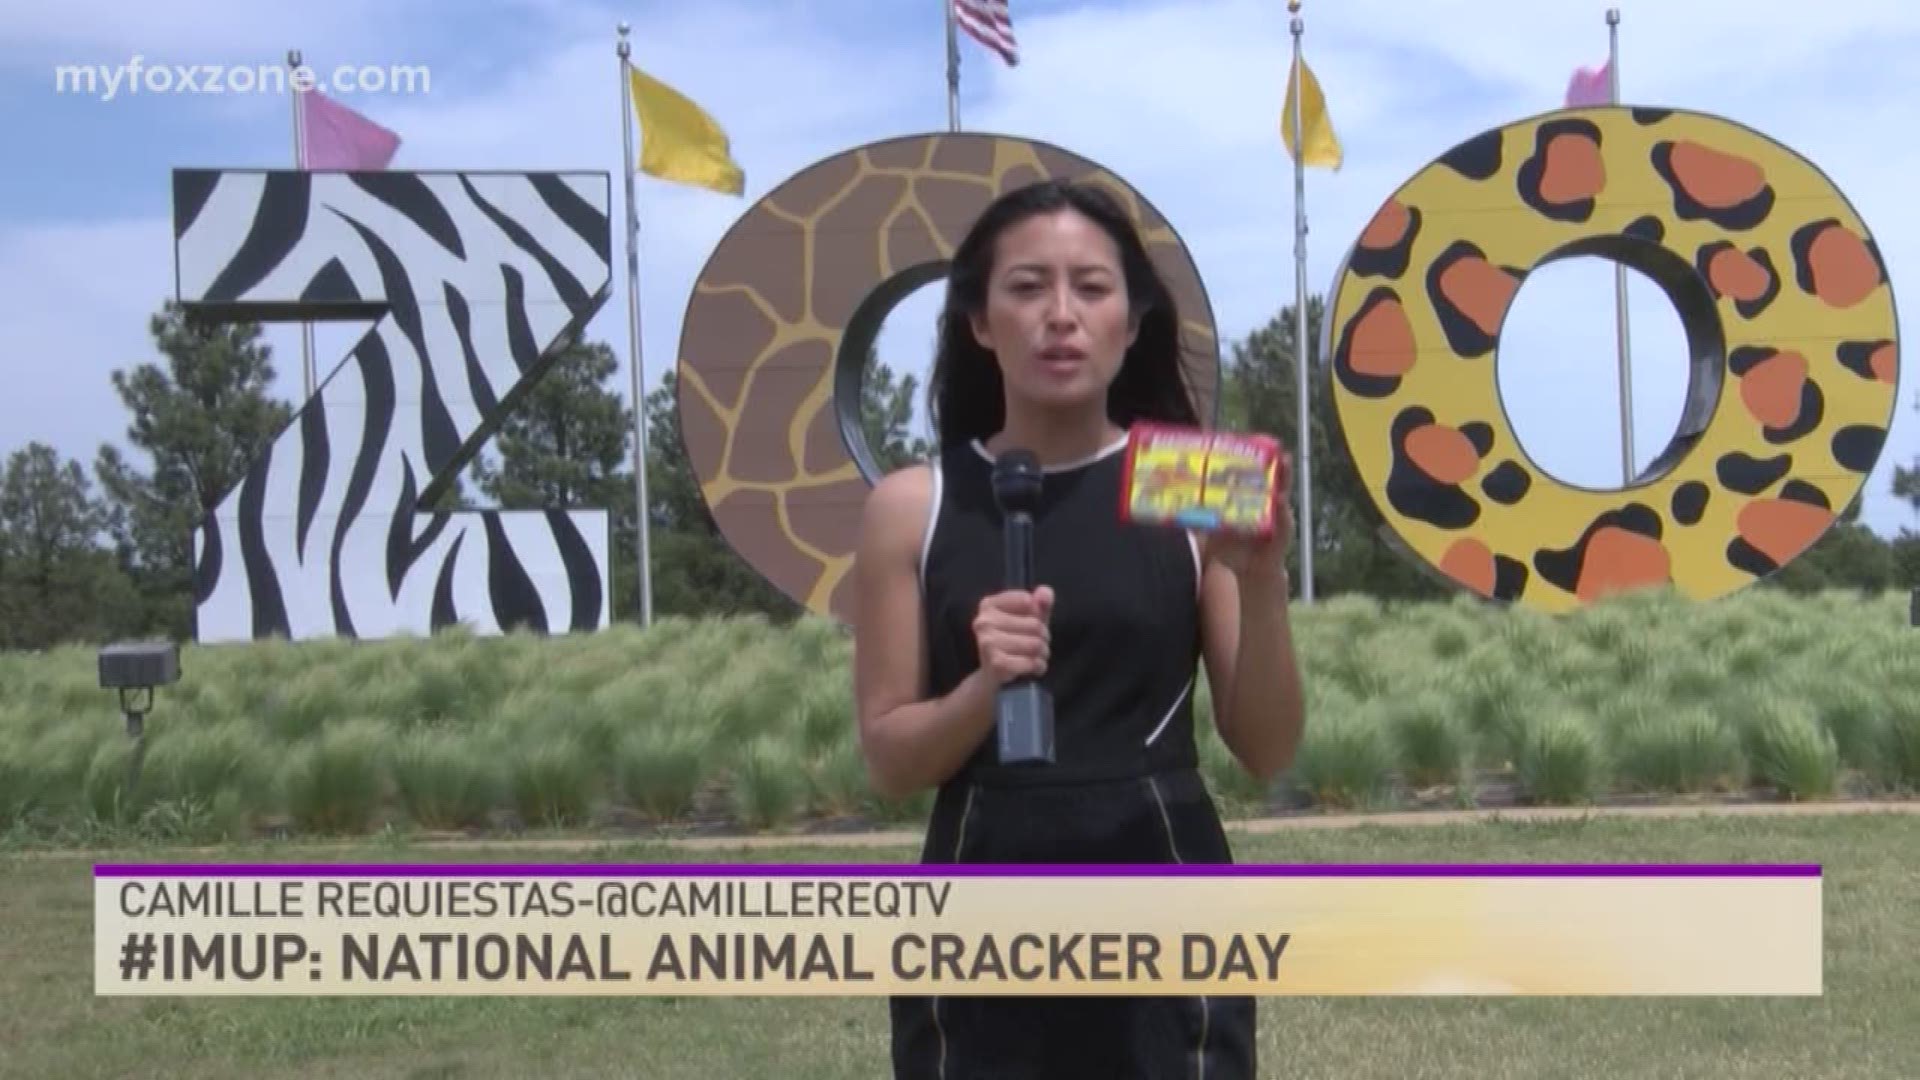 It's National Animal Cracker Day! Grab your box and visit the zoo!